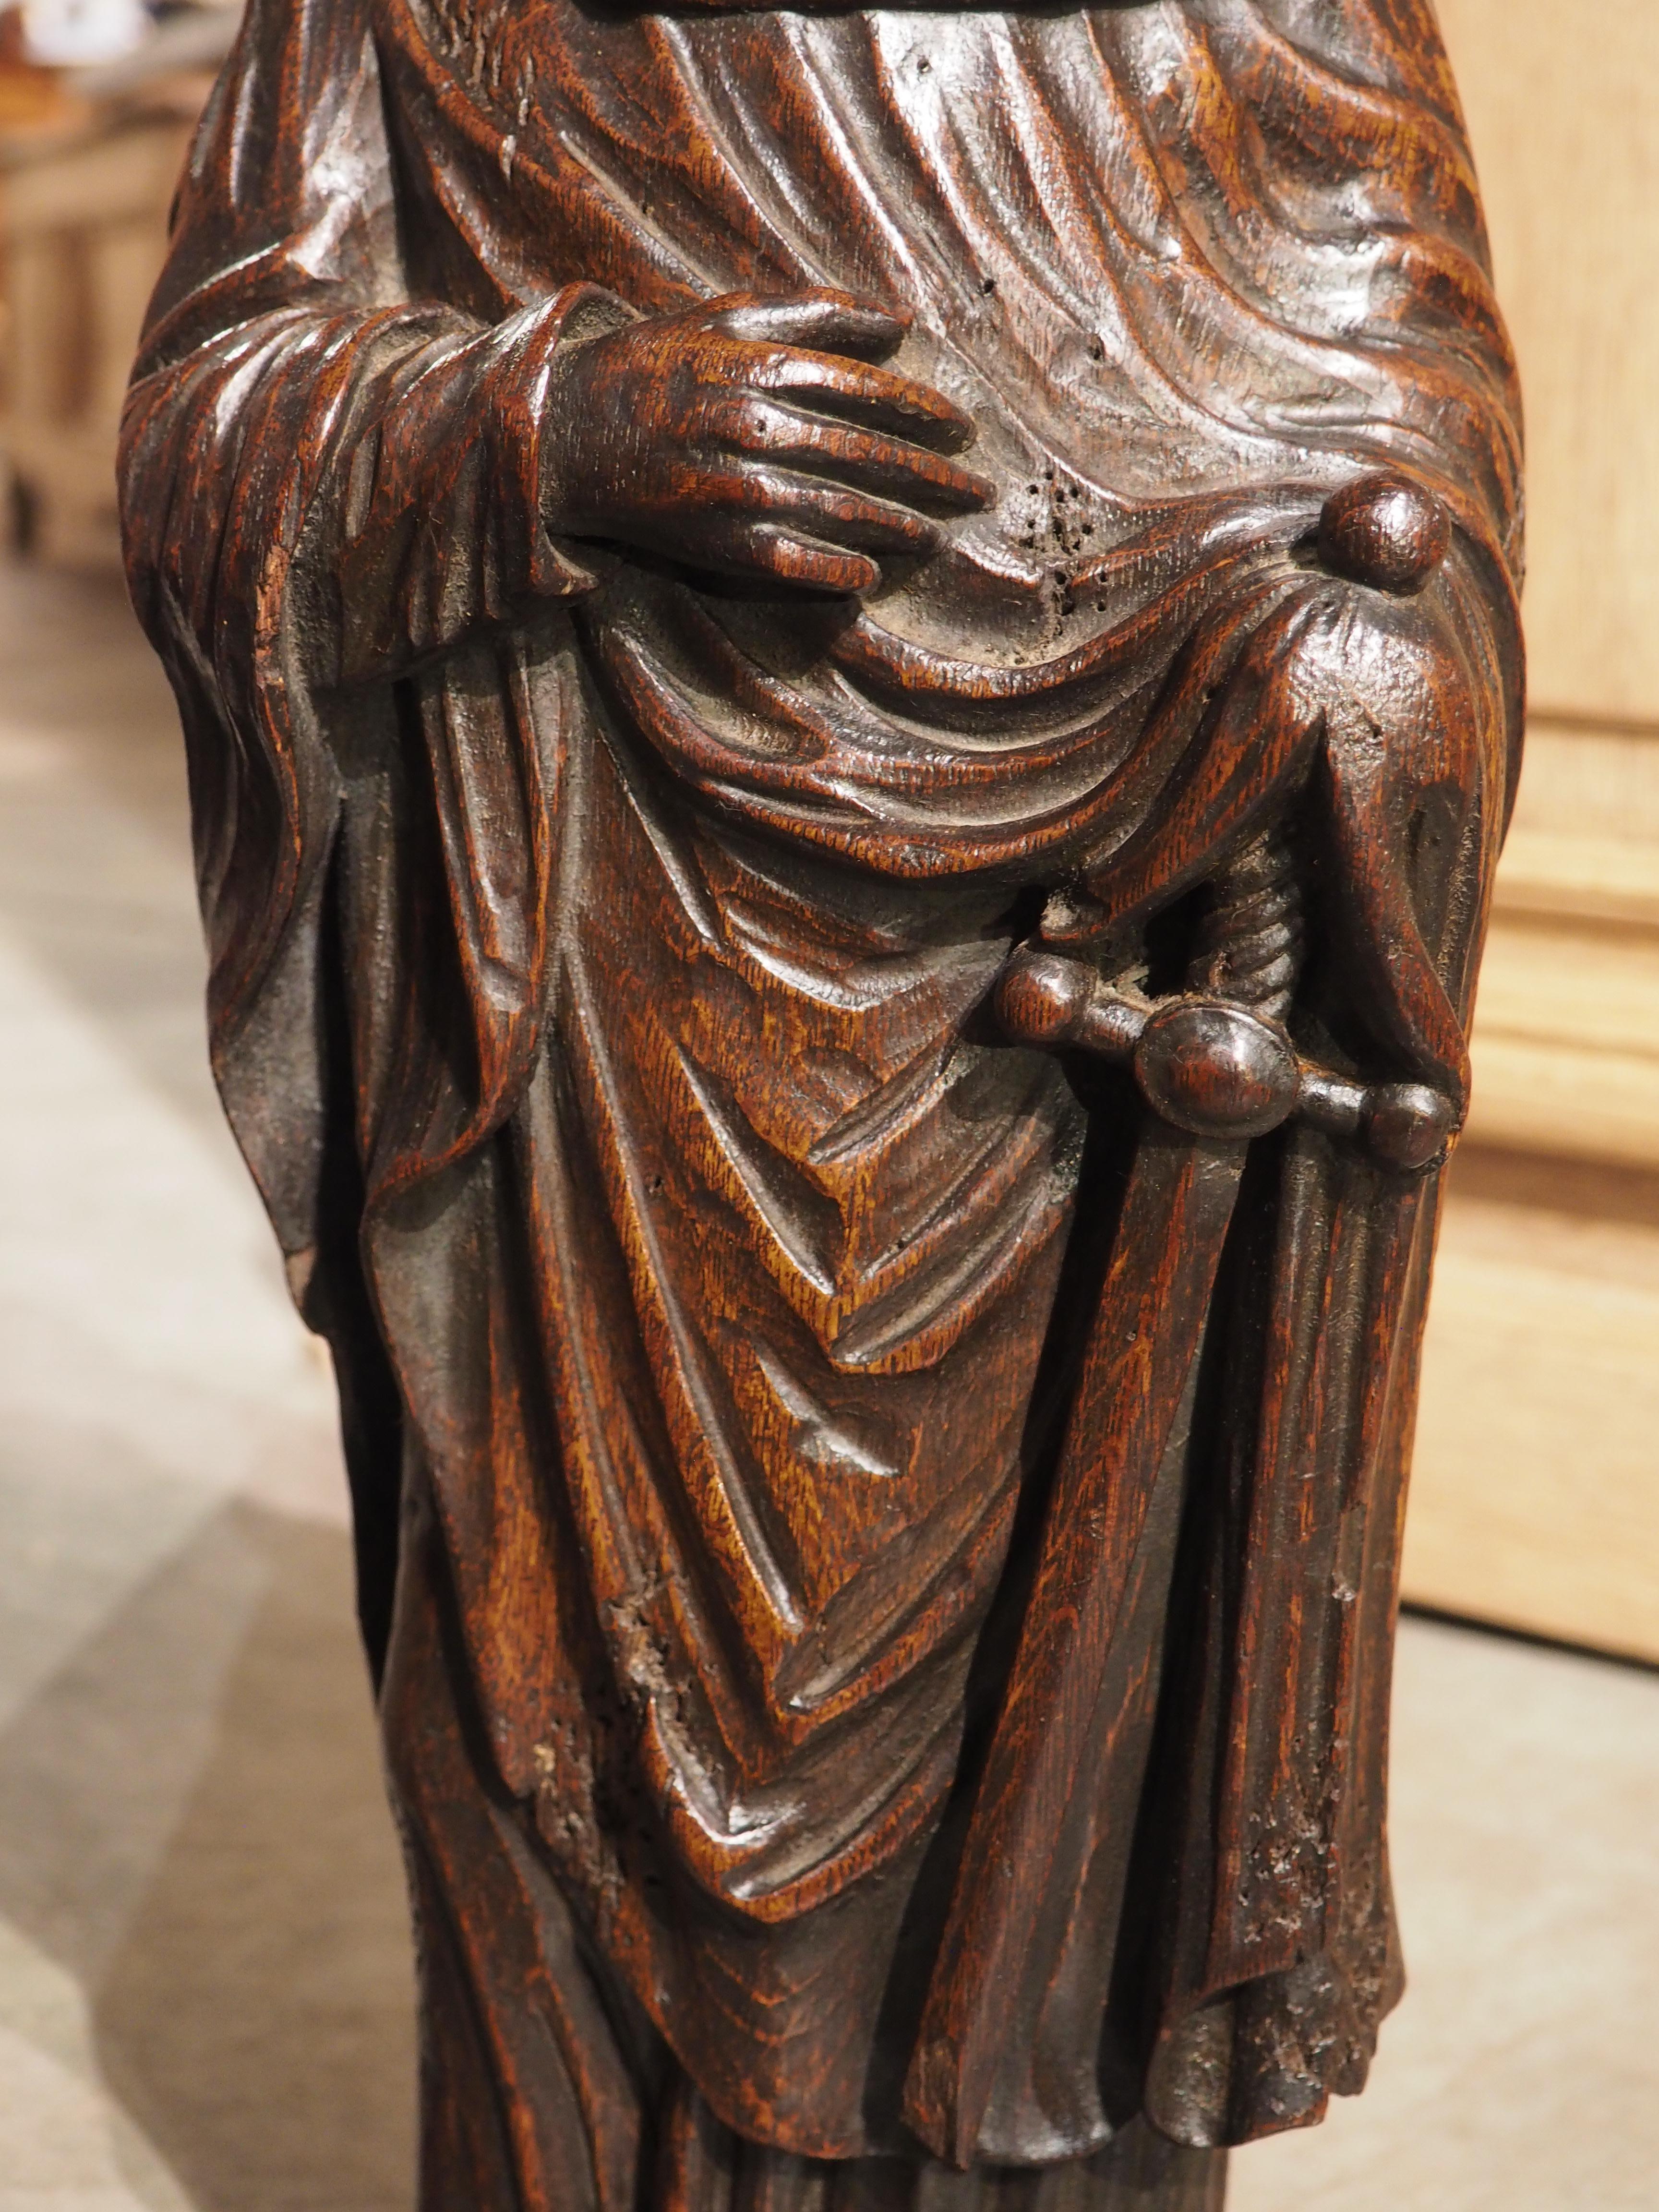 Circa 1800 Carved Oak Sculptures of the Apostles, James, John, Peter, and Paul For Sale 2